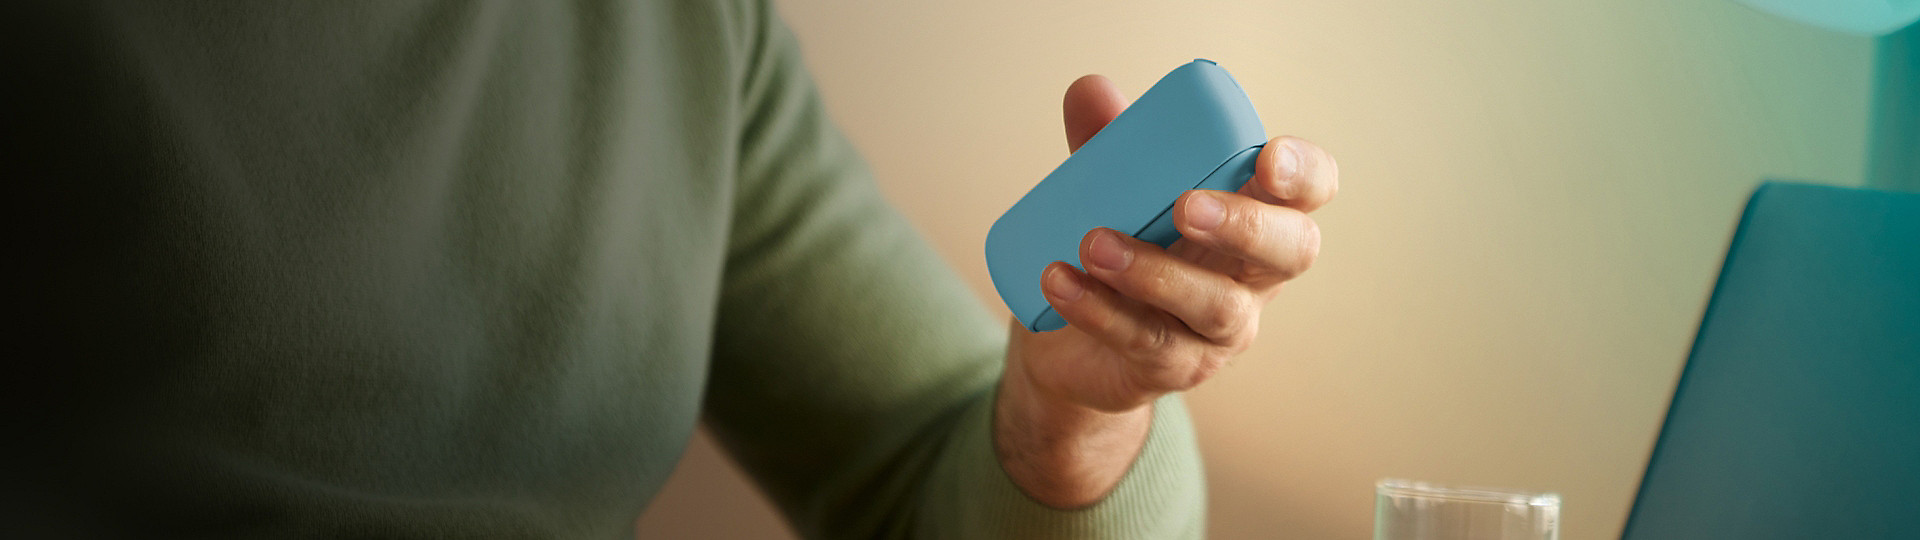 A close-up of a person wearing a green jersey holding an IQOS ILUMA holder in their hand